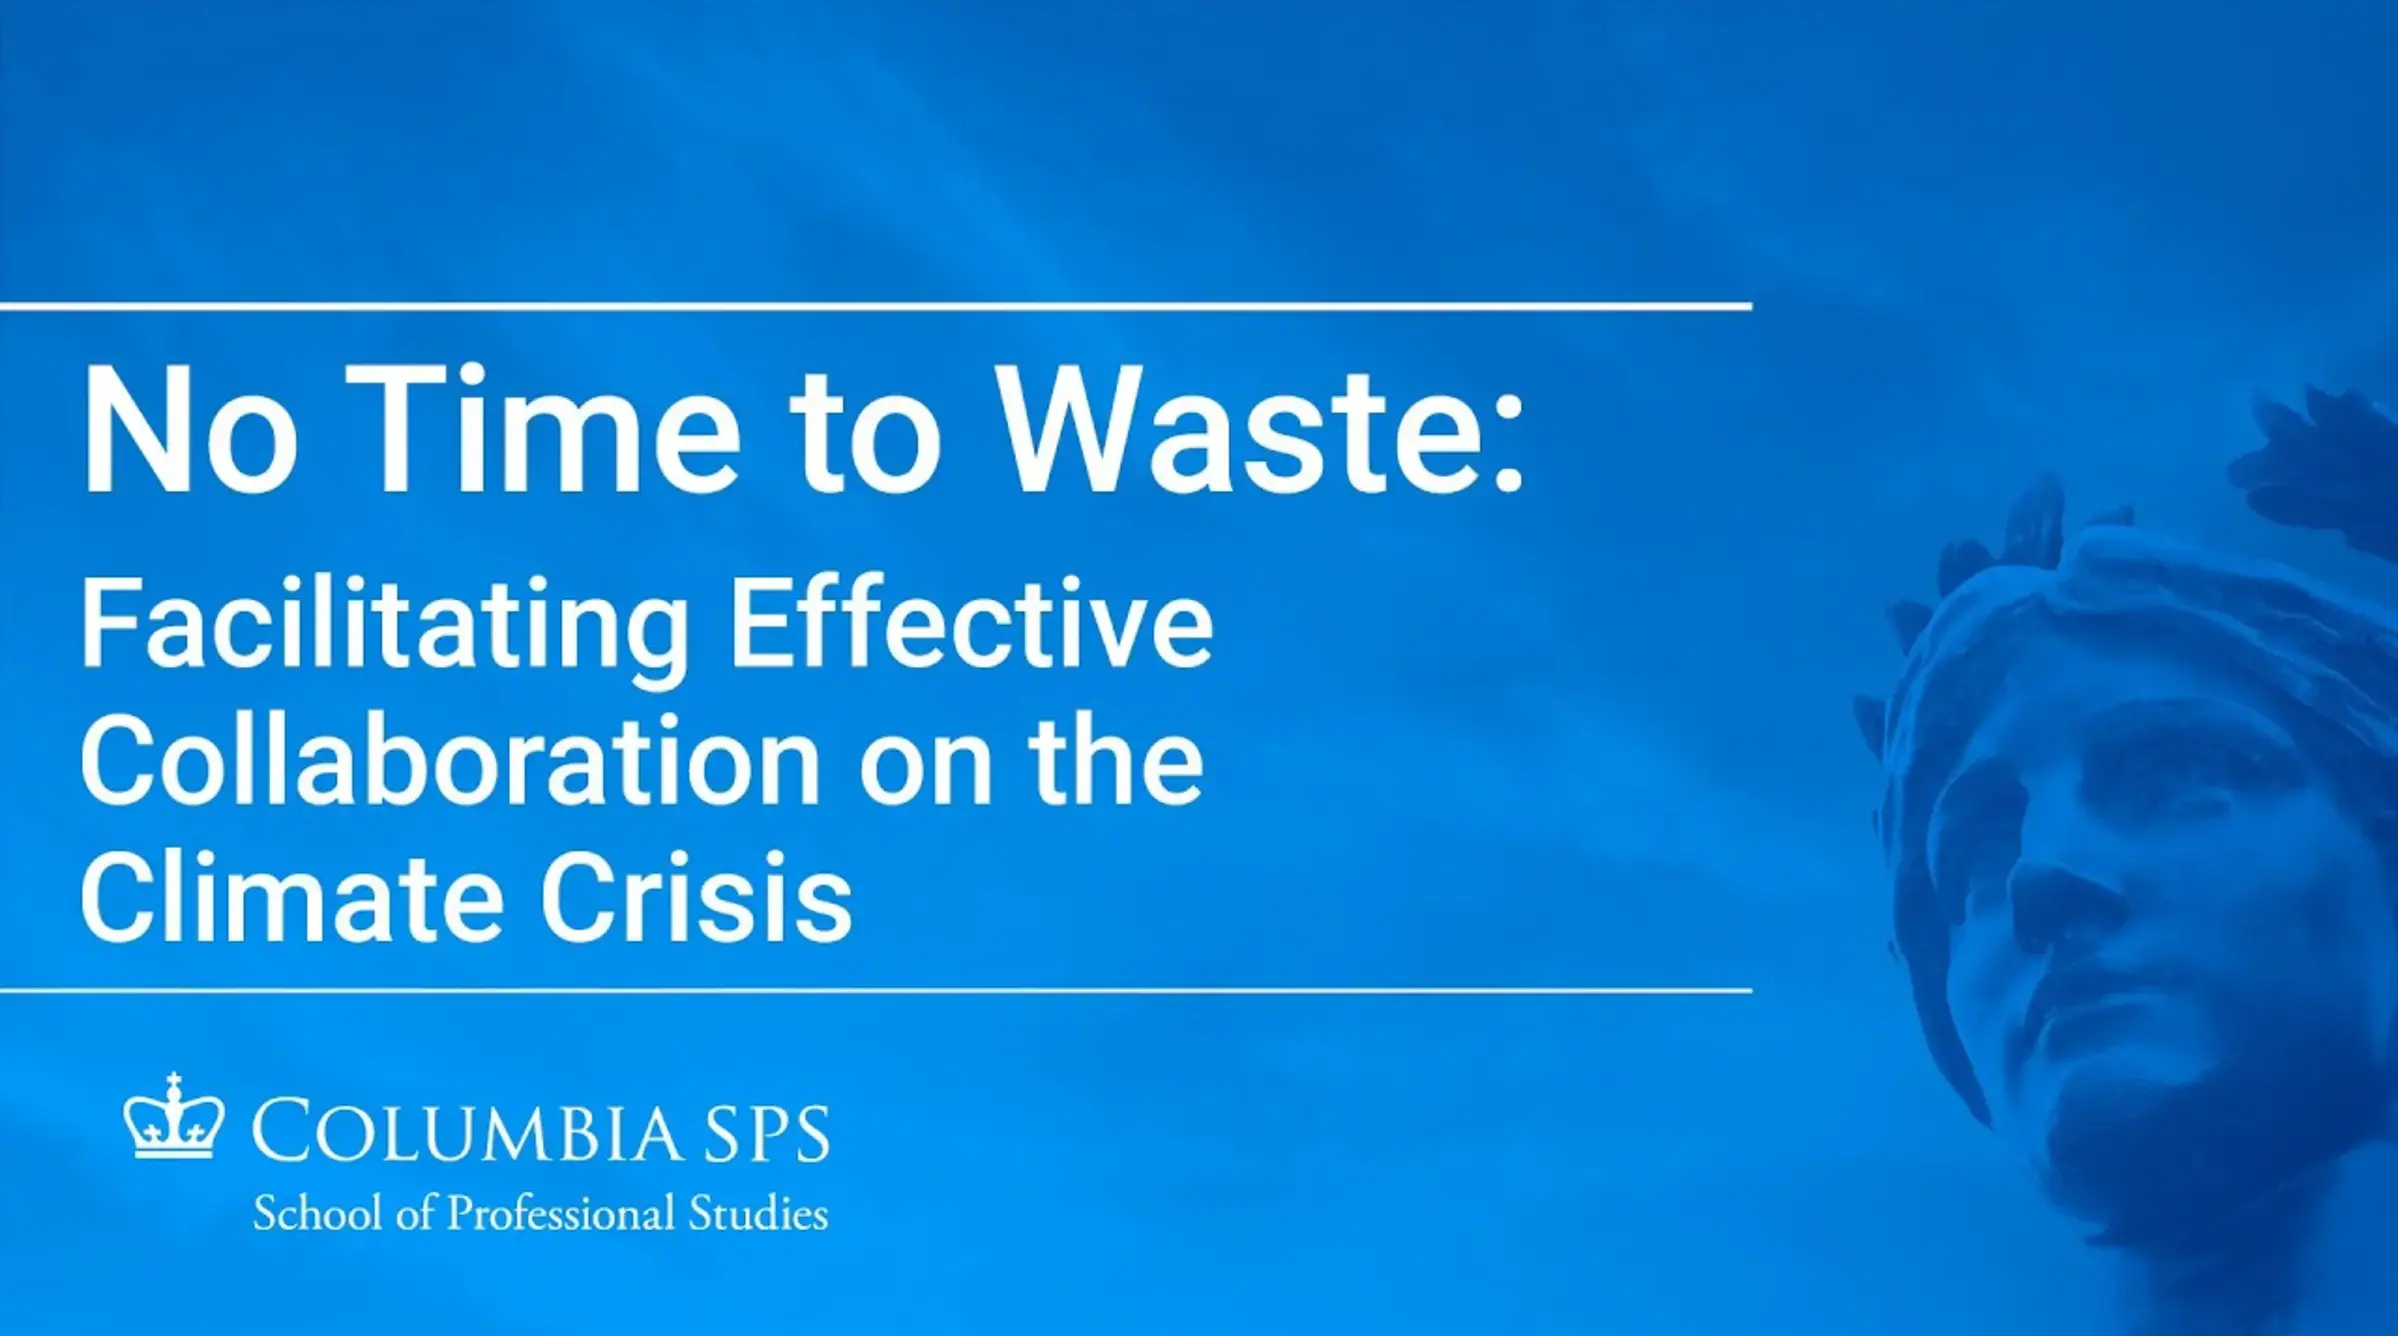 No Time to Waste: Facilitating Effective Collaboration on the Climate Crisis